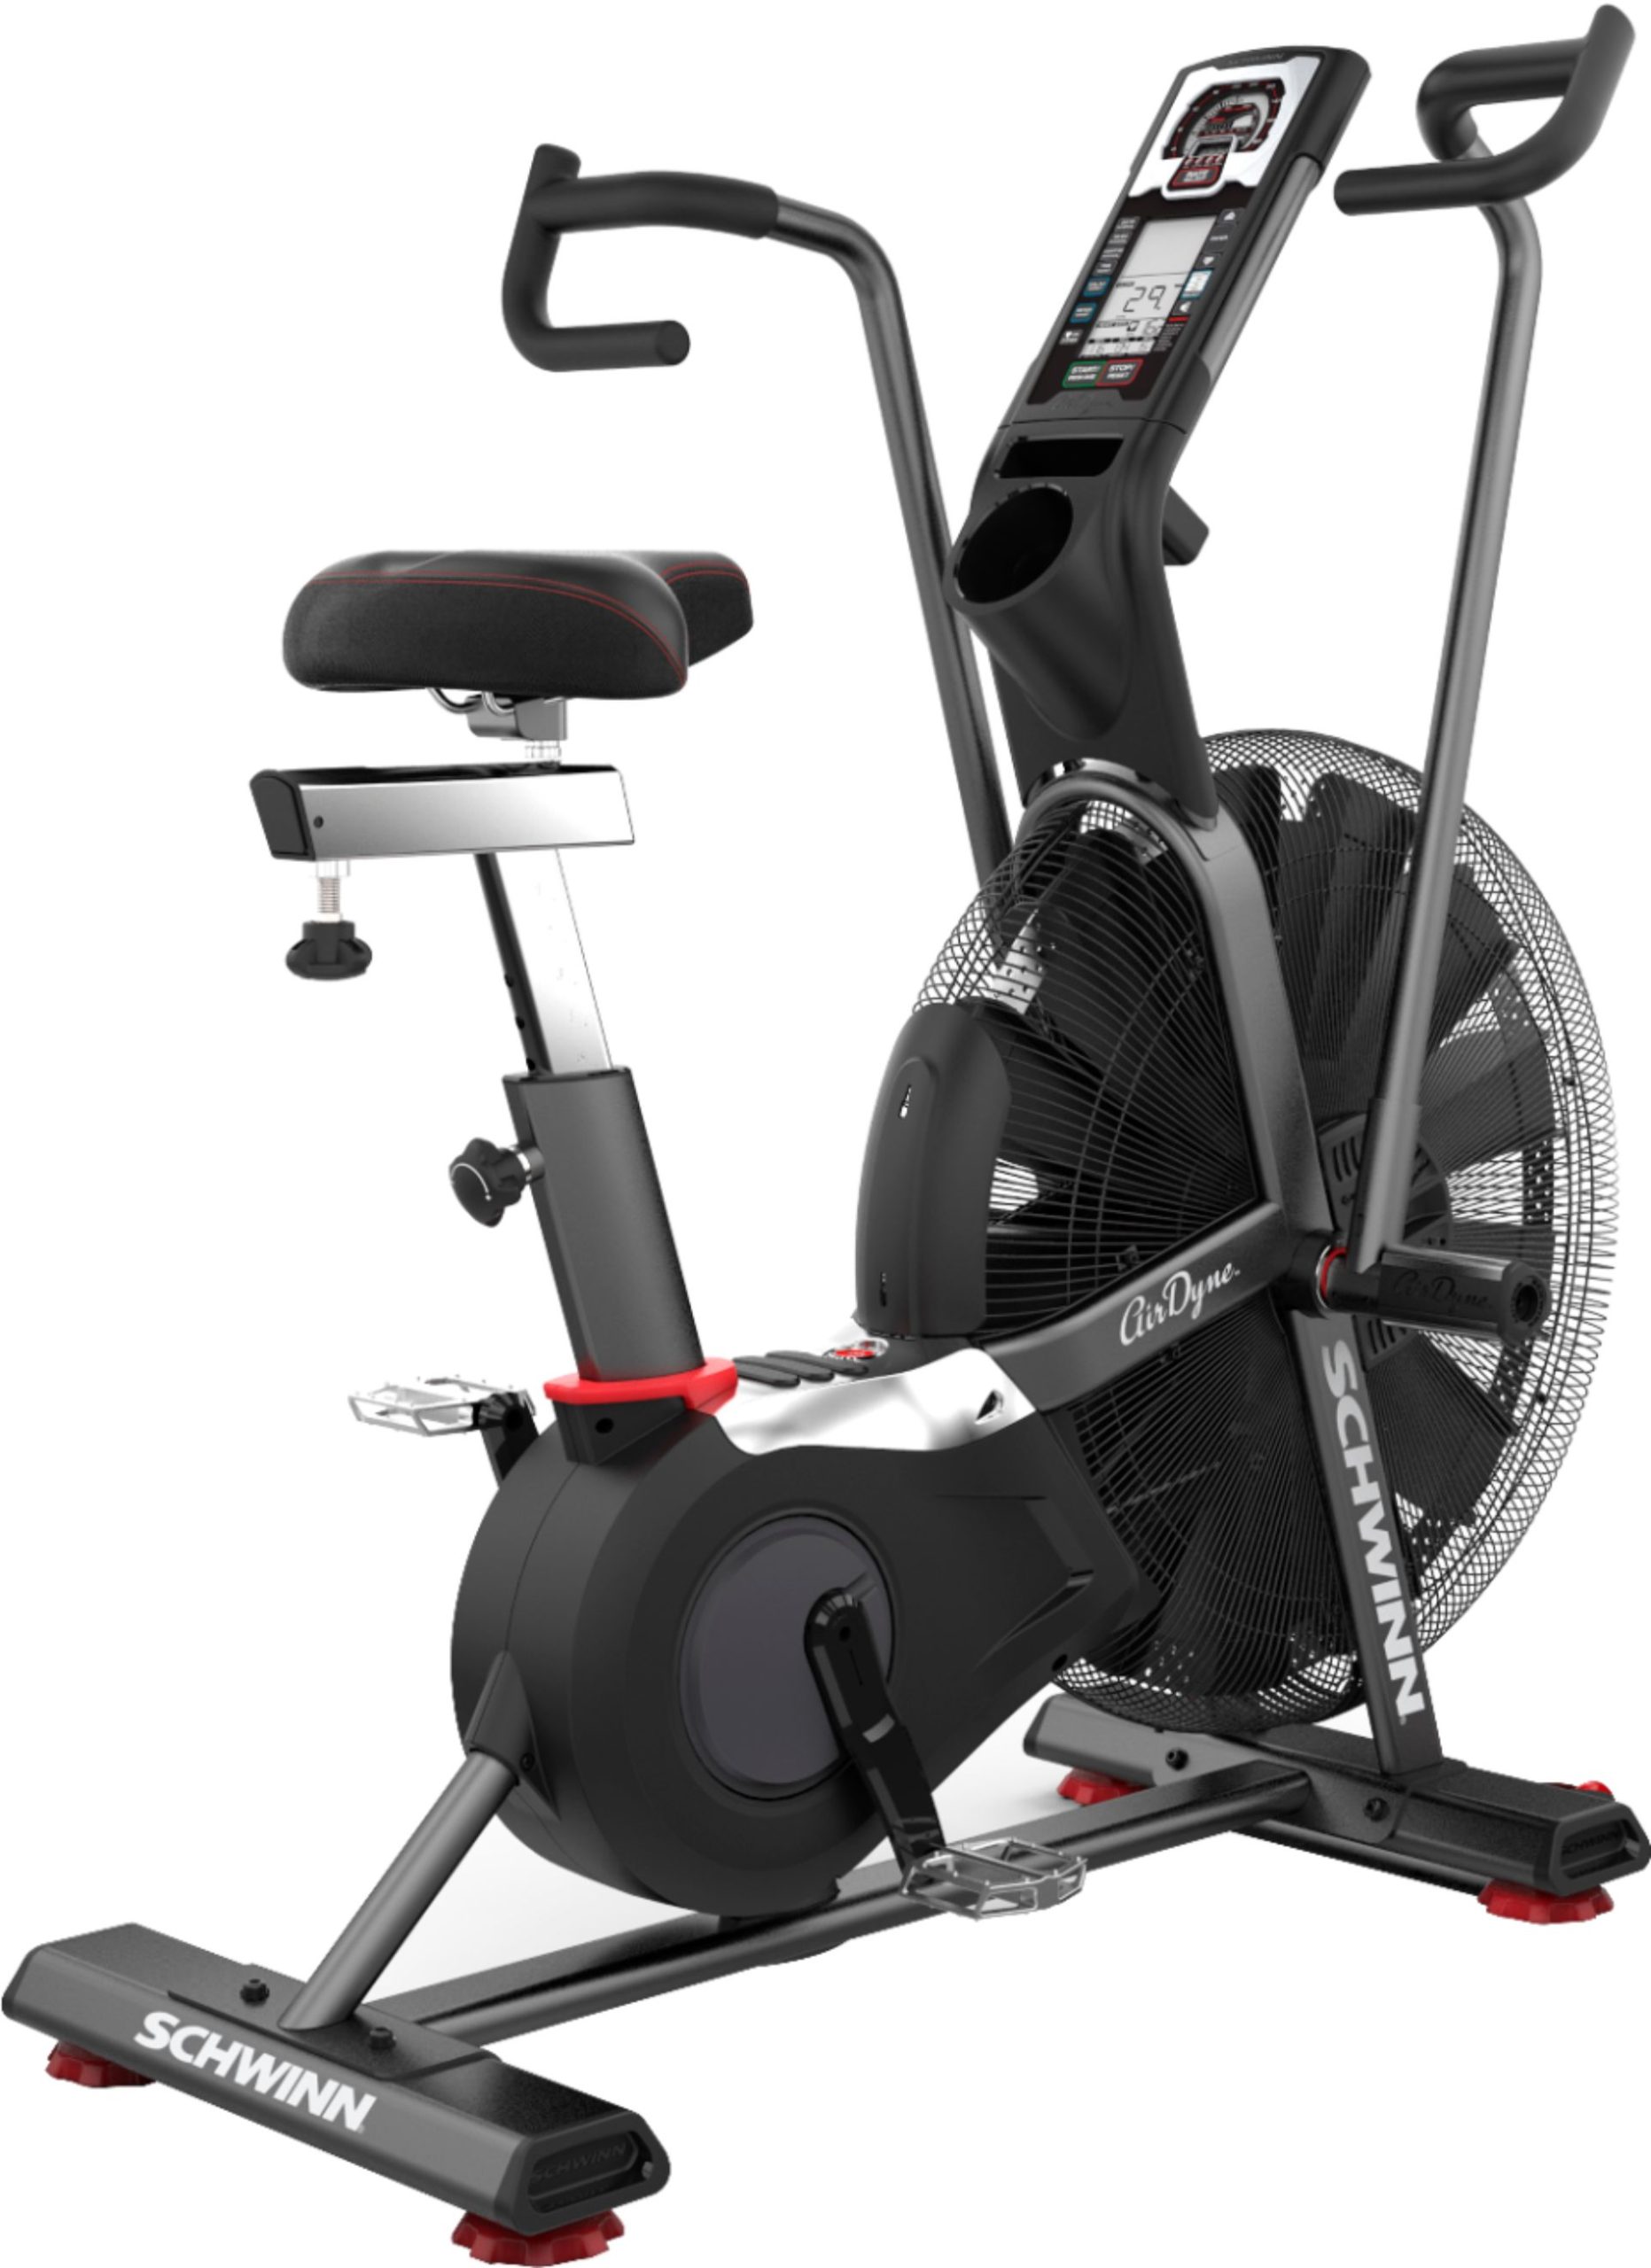 Review of the Schwinn AD7 Airdyne Exercise Bike